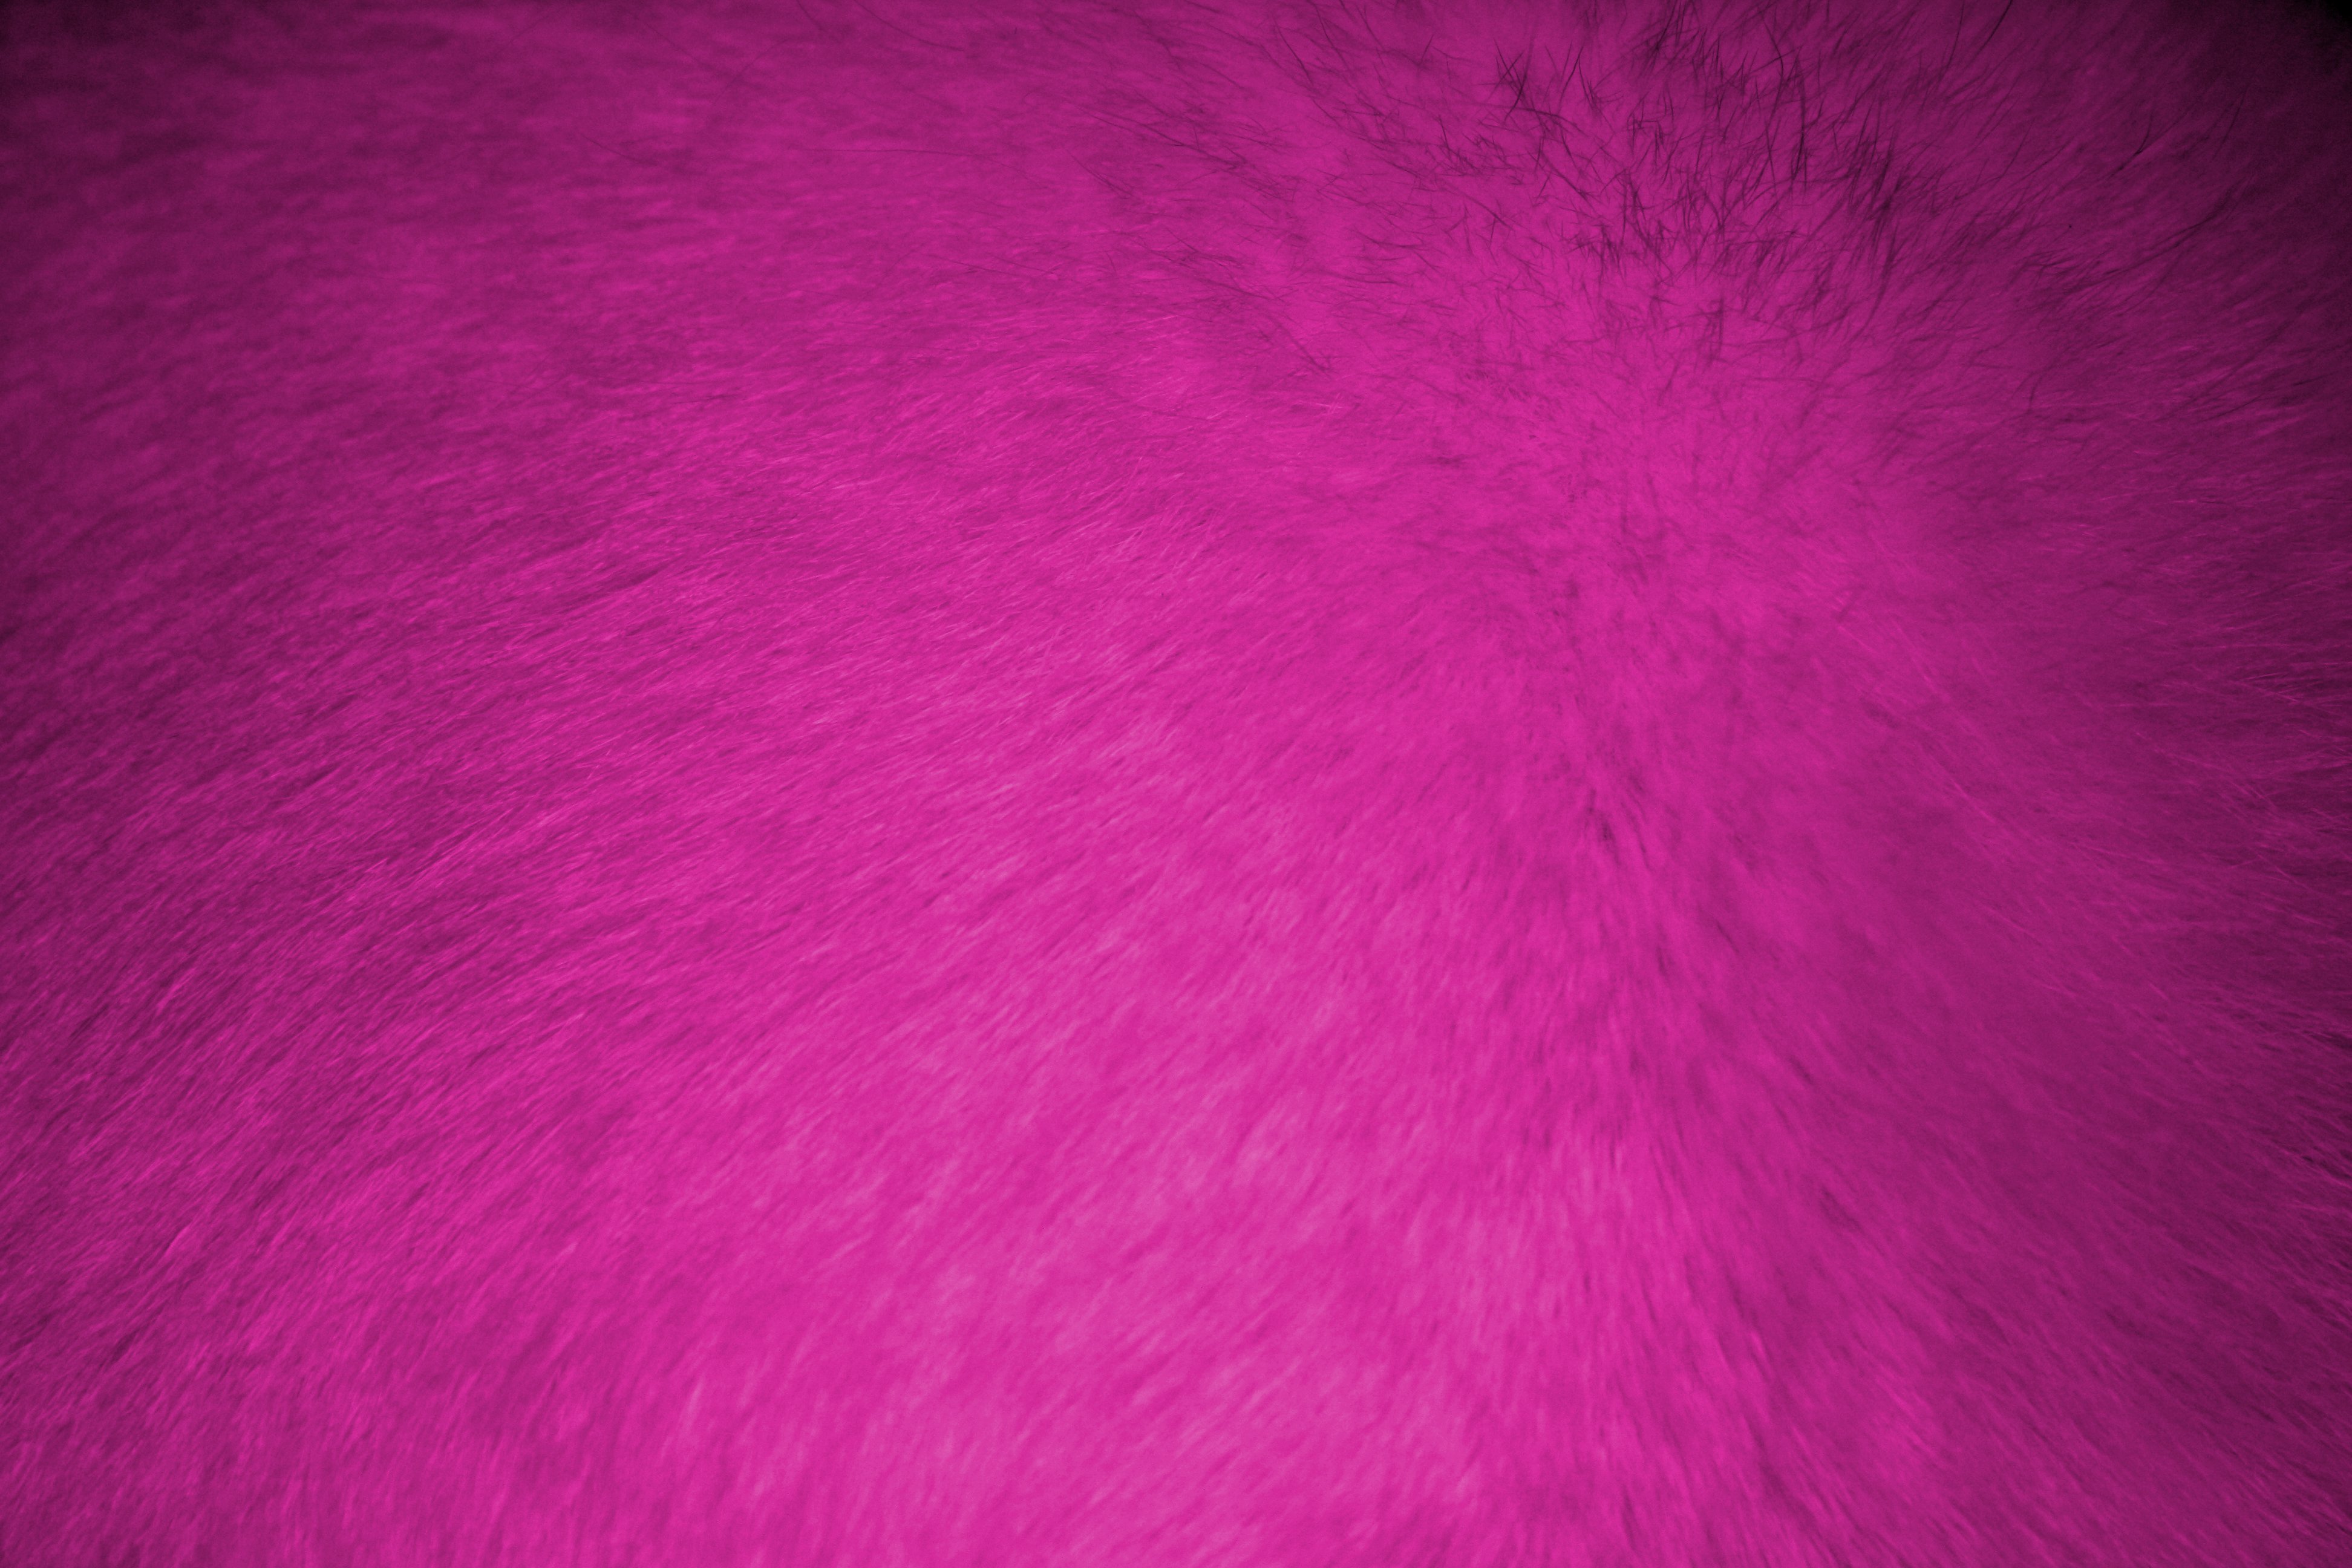 Hot Pink Fur Texture High Resolution Photo Dimensions